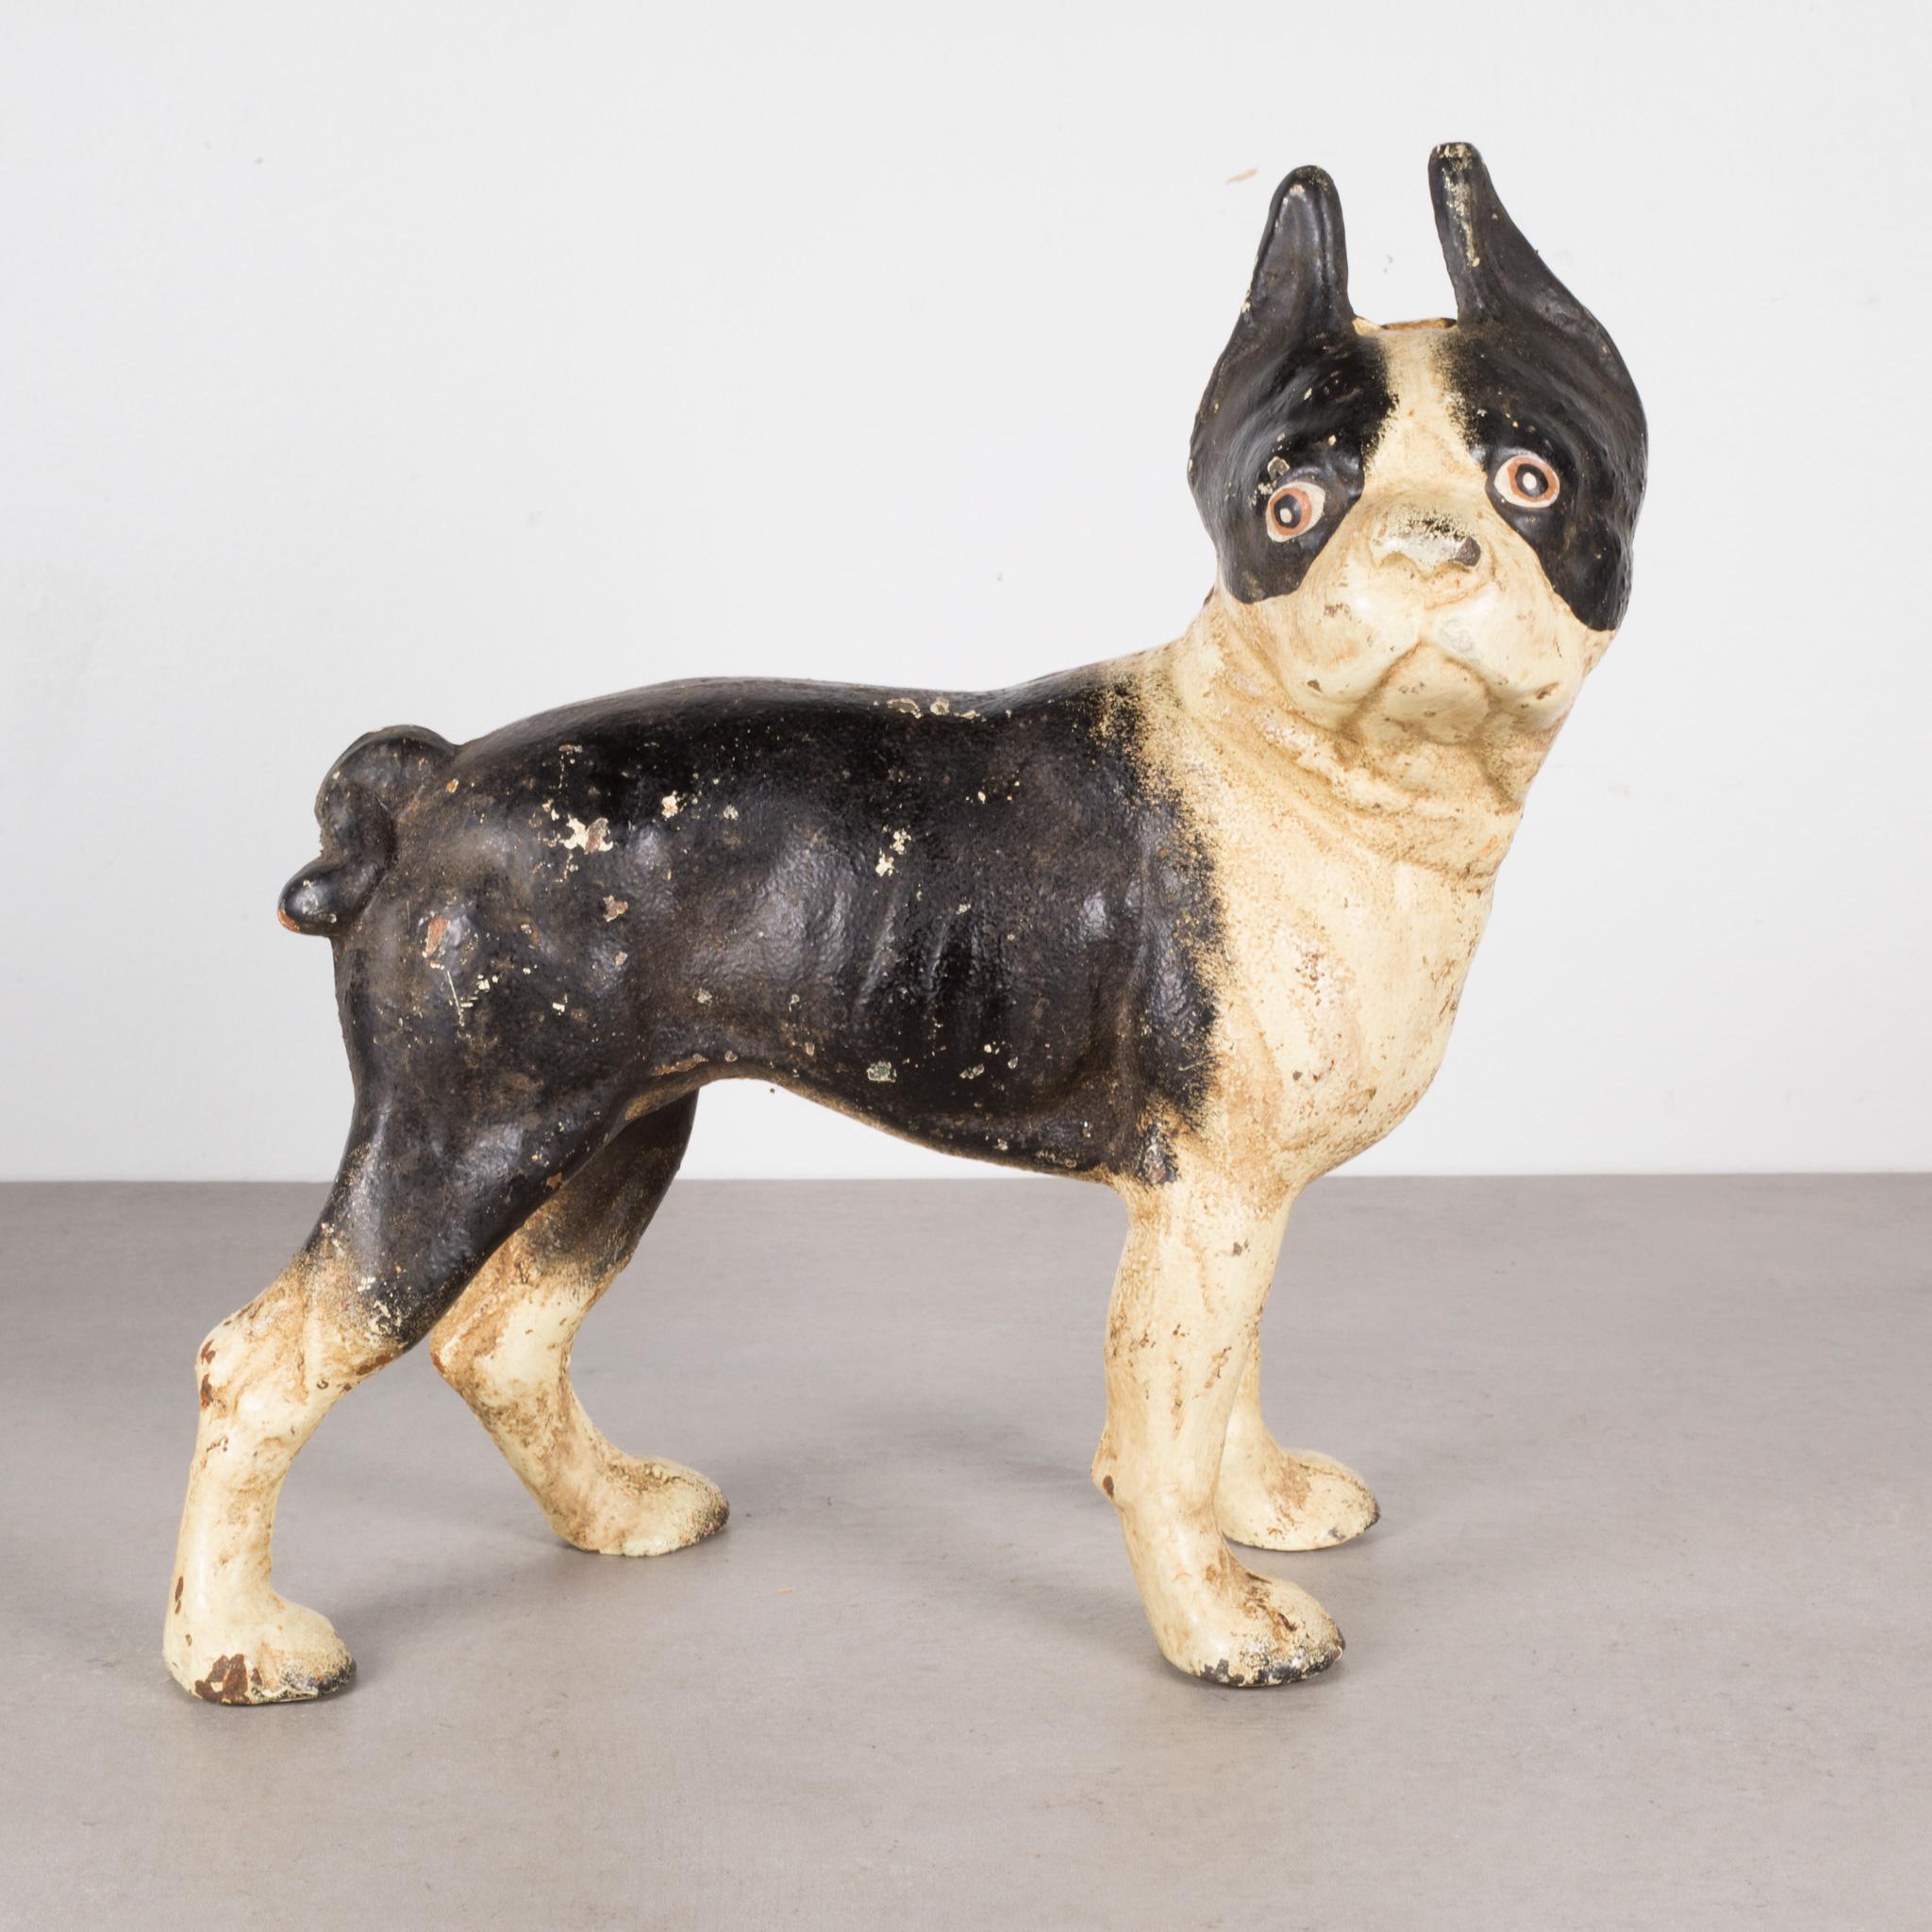 Cast iron Boston Terrier doorstop.
May or may not be Hubley. 
Very solid.
Good condition. No cracks.